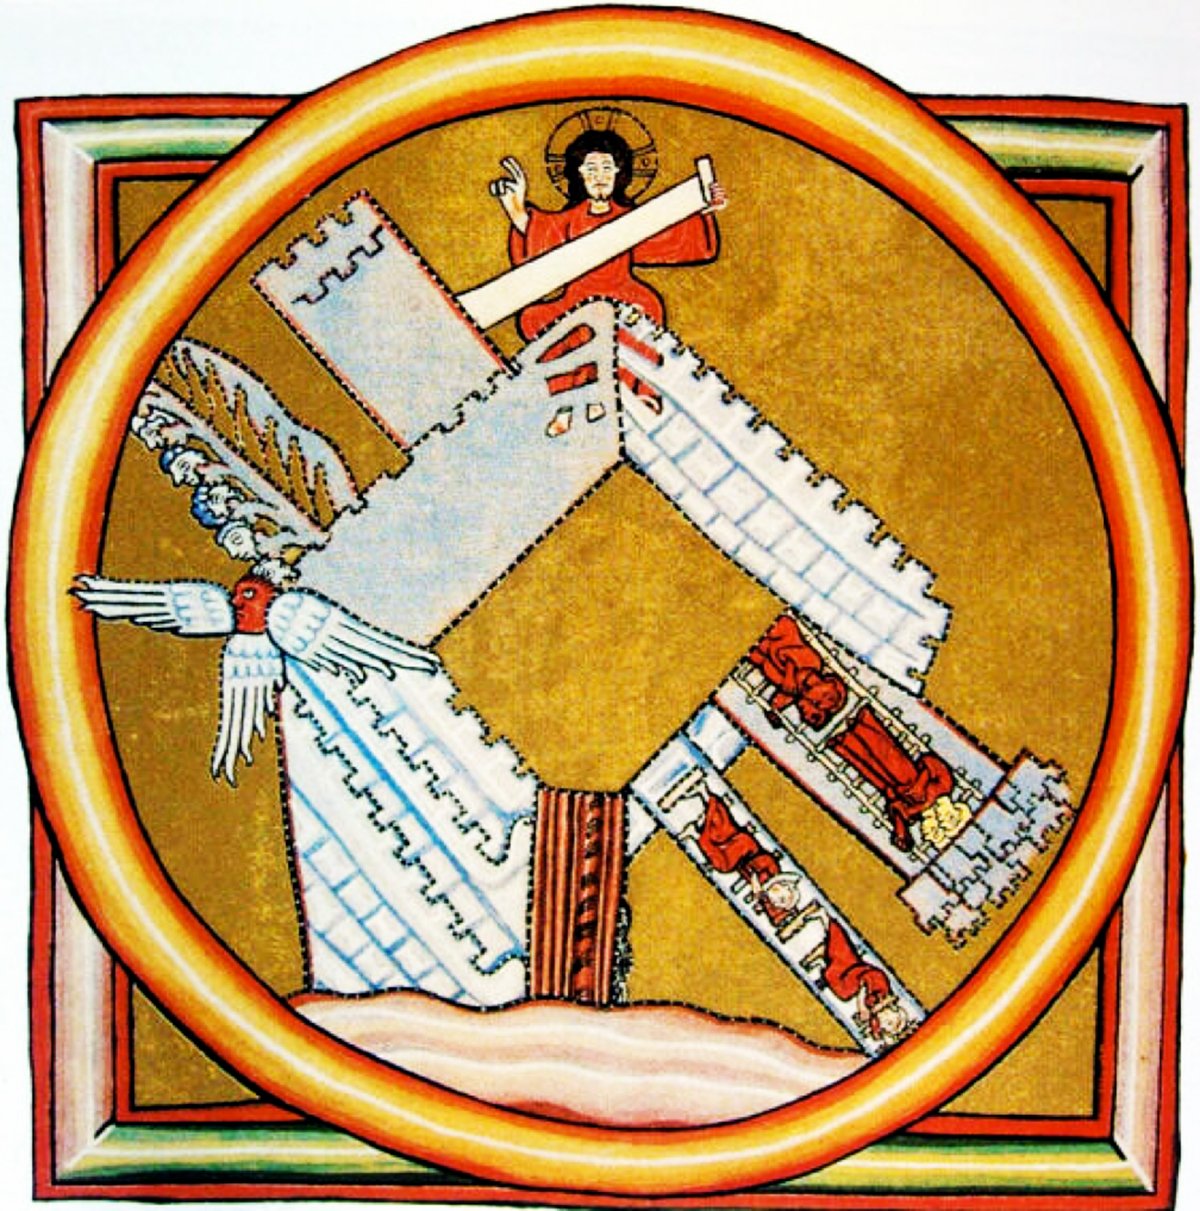 An illustration from Hildegard of Bingen's work depicting her vision of the City of God. The image is centered around a circular motif with an intricate design, symbolizing the divine. Within the circle, a structure resembling a tower extends vertically and horizontally, with figures placed within its compartments, suggesting the orderly and hierarchical nature of the celestial city. At the top of the structure, a figure with a halo, possibly representing Christ, presides over the scene. A dove, often used to symbolize the Holy Spirit, is depicted flying towards the central figure. The background is golden, framed by a thick, multi-colored border that emphasizes the sacred and otherworldly aspect of the vision. The overall composition conveys the mystical and architectural elements typical of Hildegard's visionary iconography.